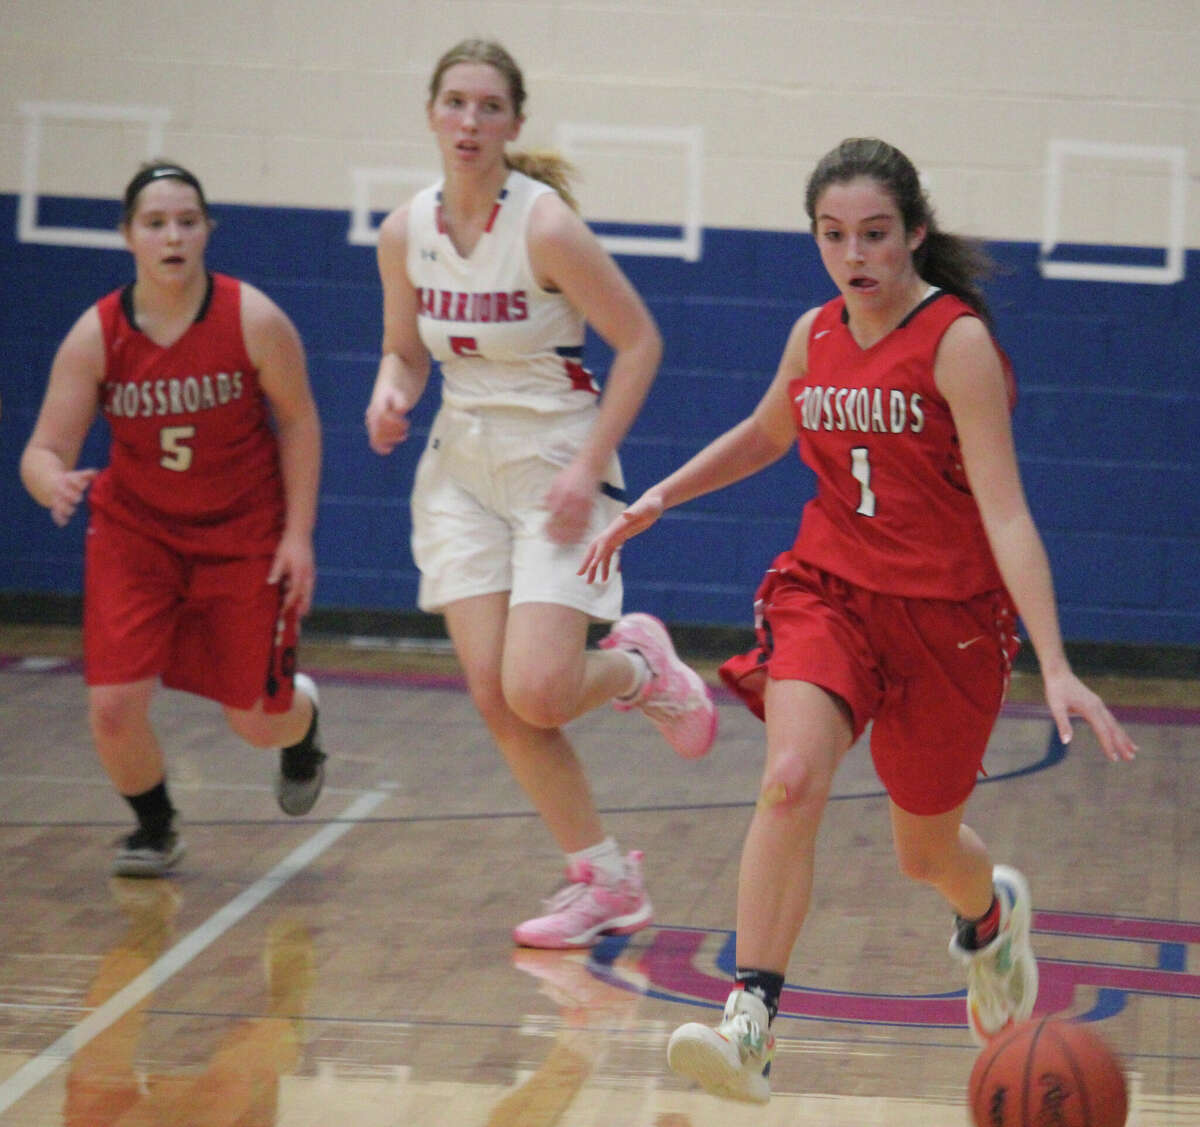 Crossroads Jackie Cole (1) dribbles the ball down the court while teammate Alexis Cole (5) and Chippewa Hills' Ila Swier are in pursuit.